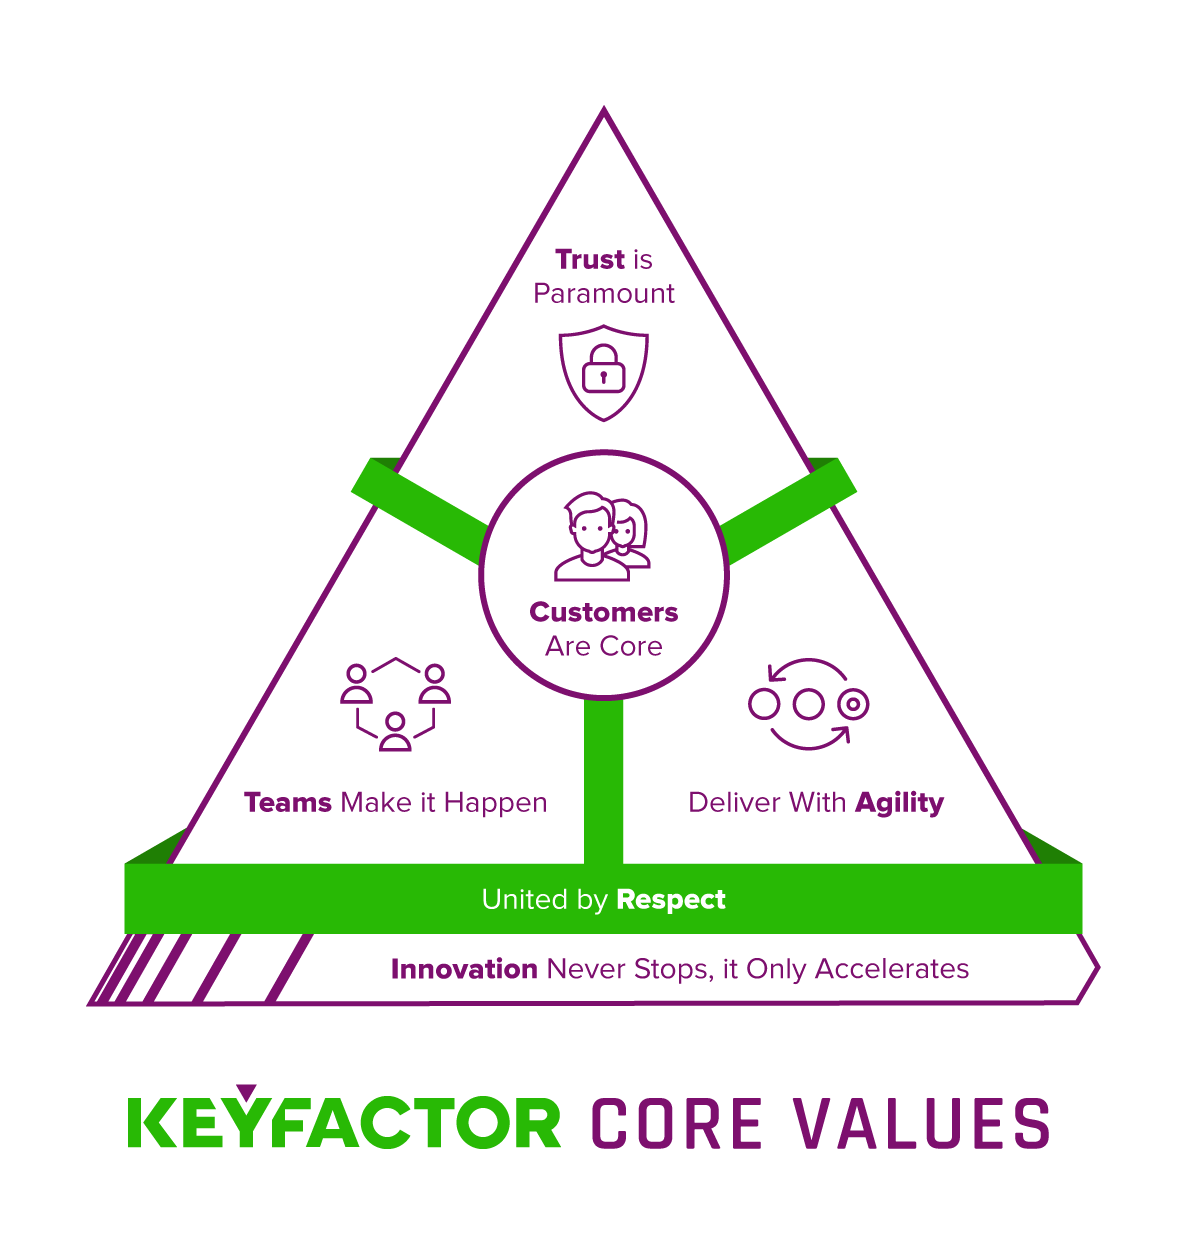 New Core Value to Drive Business and Community Innovation